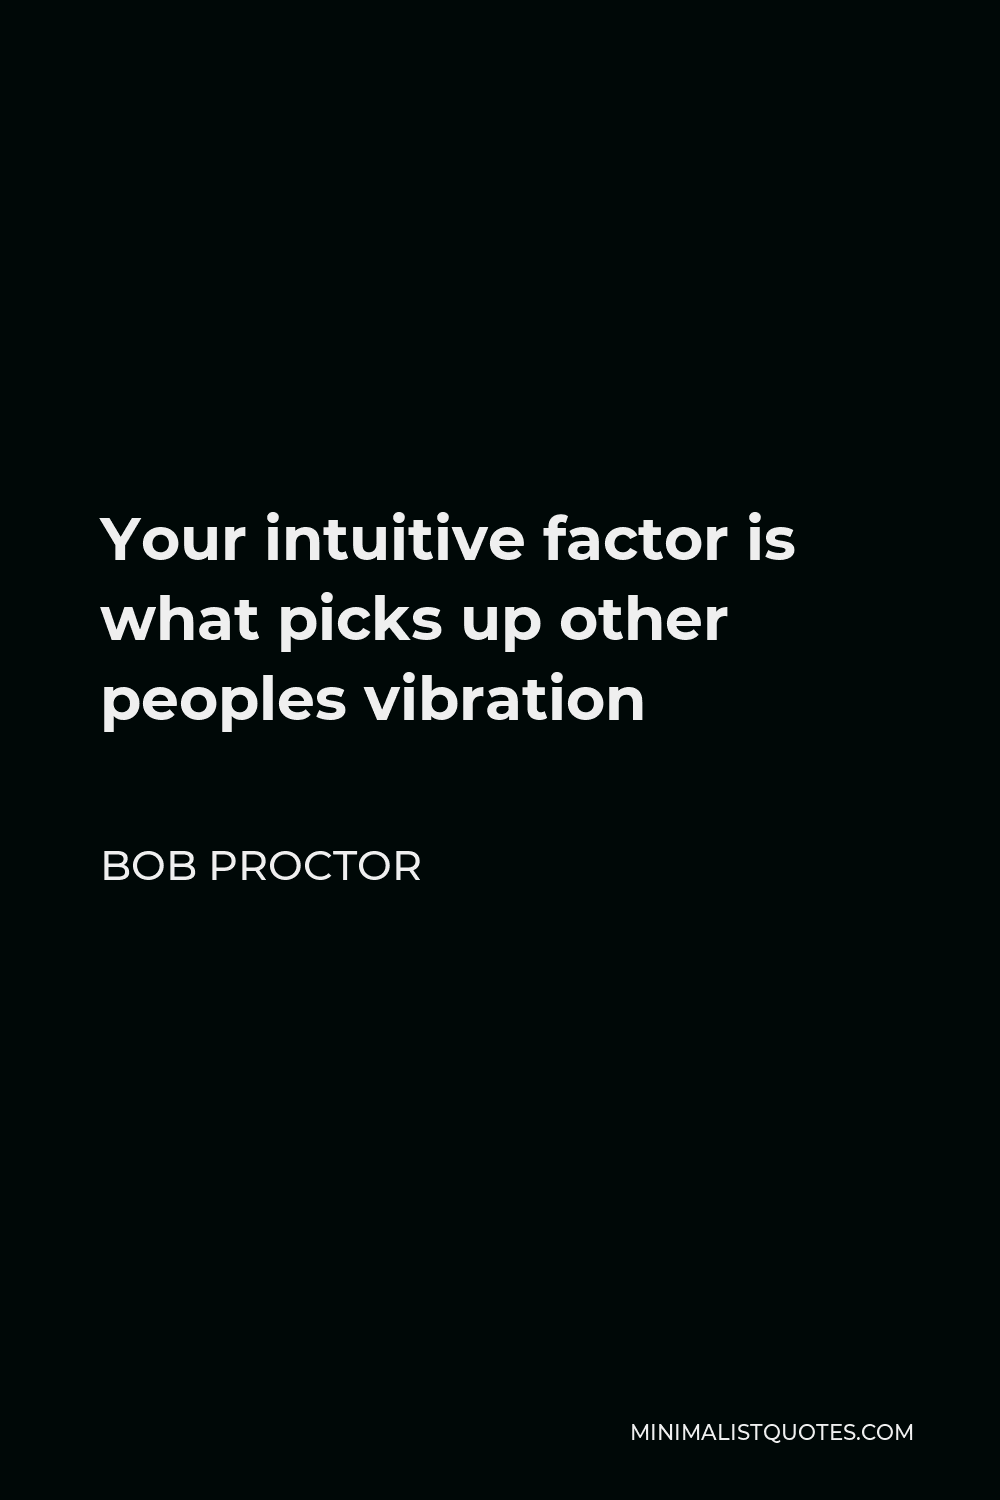 Bob Proctor Quote - Your intuitive factor is what picks up other peoples vibration